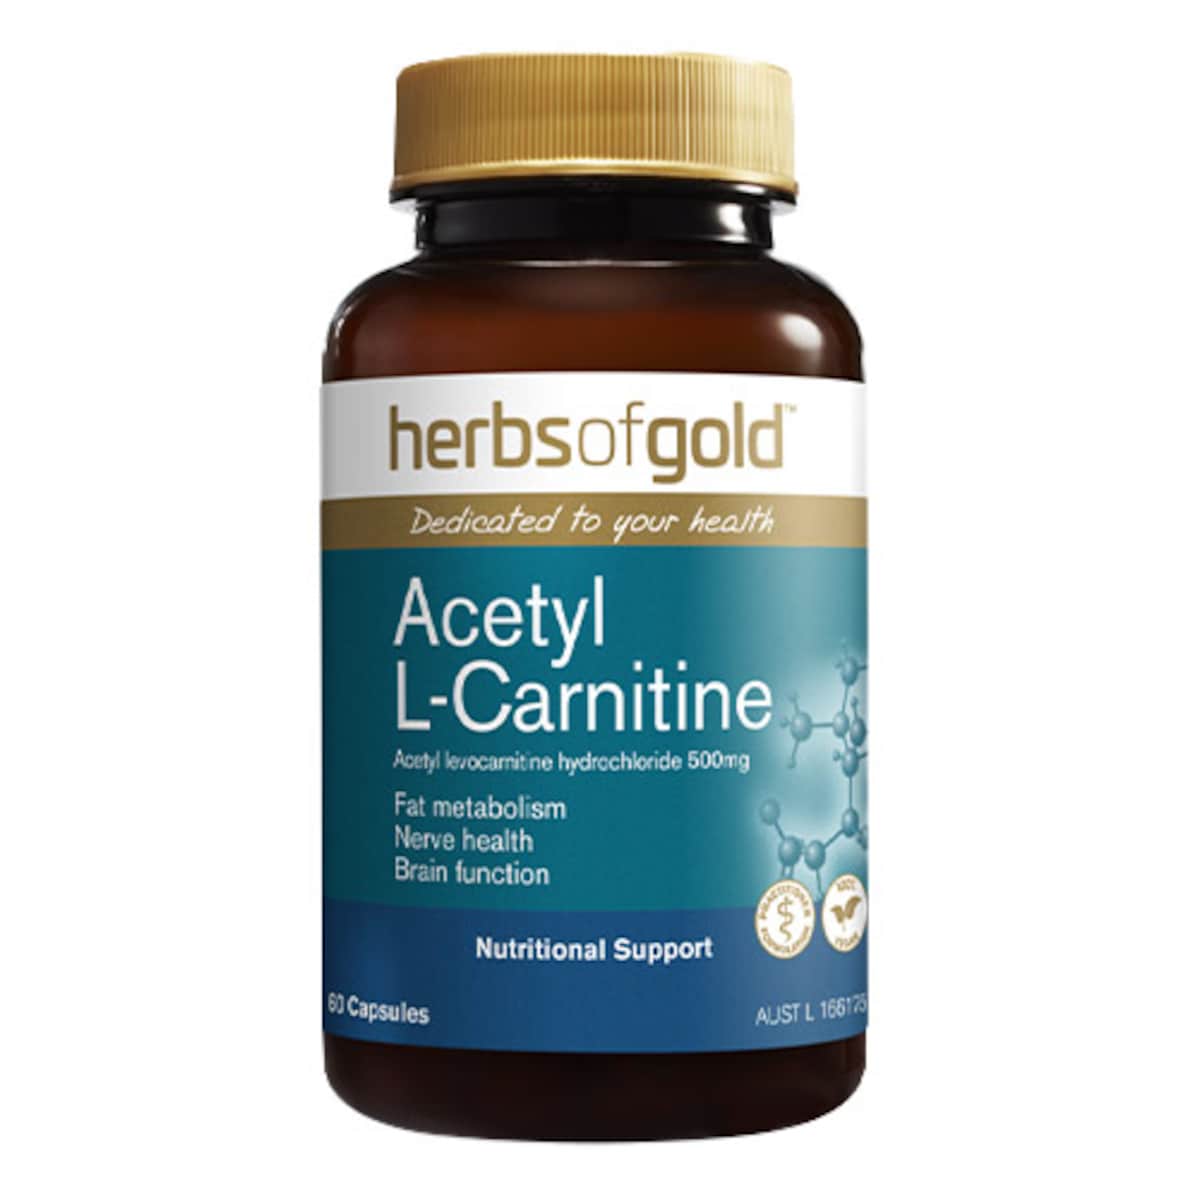 Herbs of Gold Acetyl L-Carnitine 60 Capsules Australia